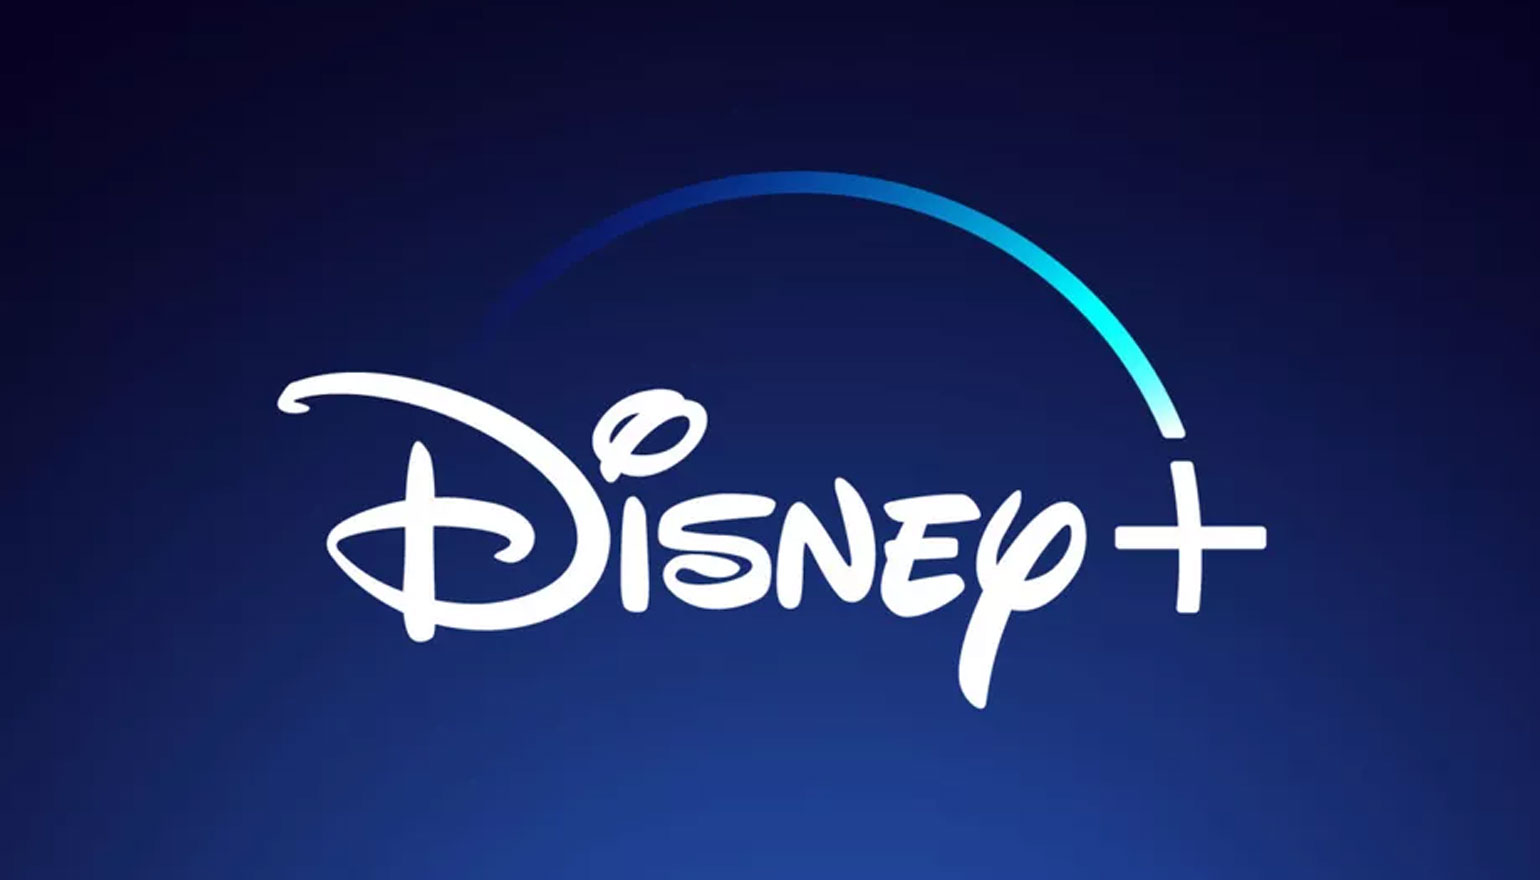 Disney streaming service is called Disney Plus launching end of 2019